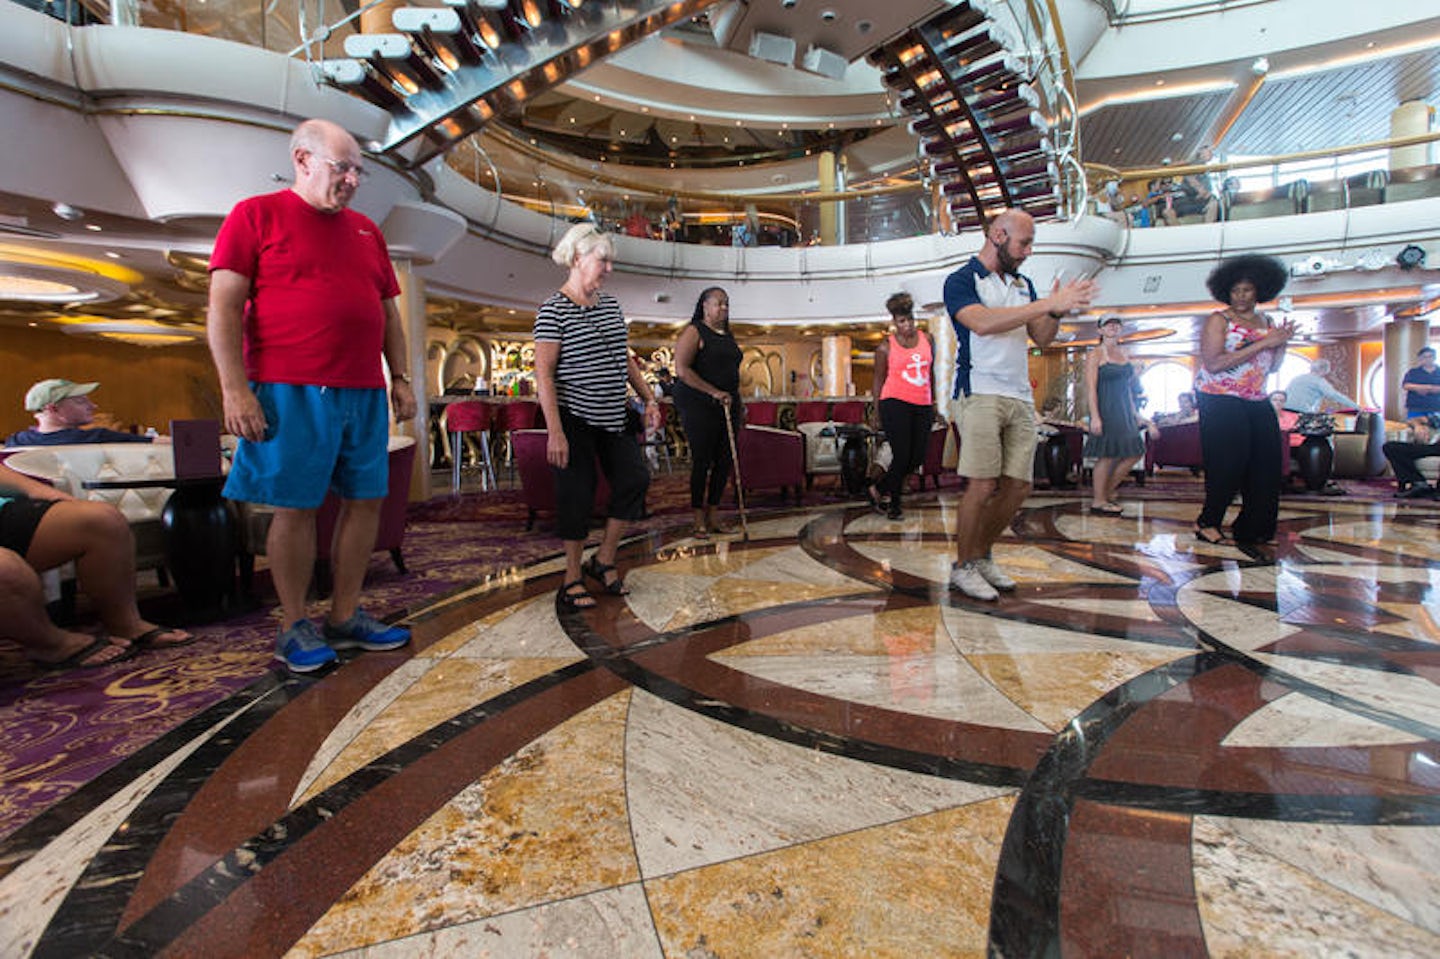 70s Line Dance Class on Enchantment of the Seas